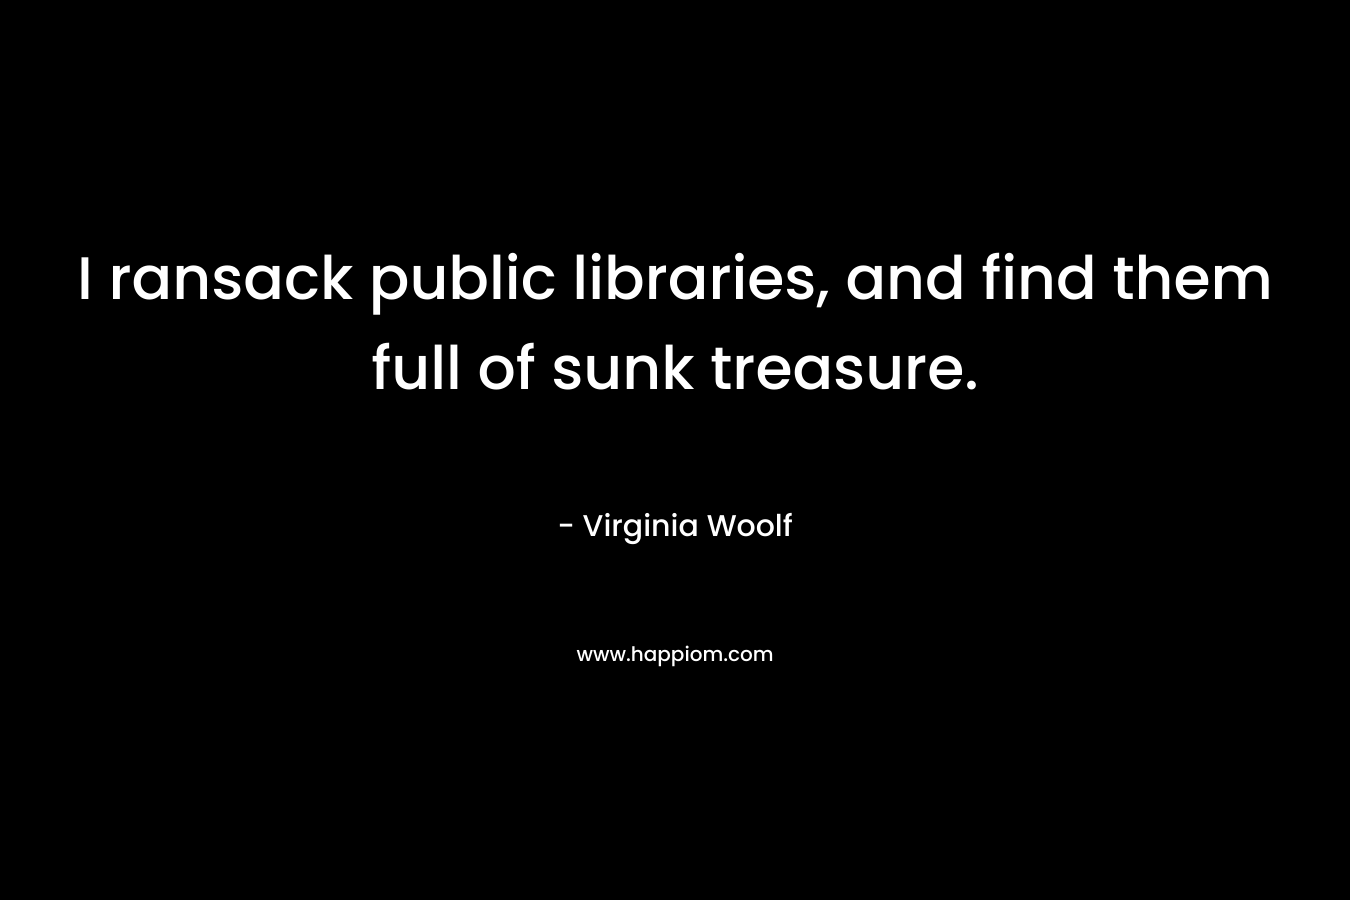 I ransack public libraries, and find them full of sunk treasure.